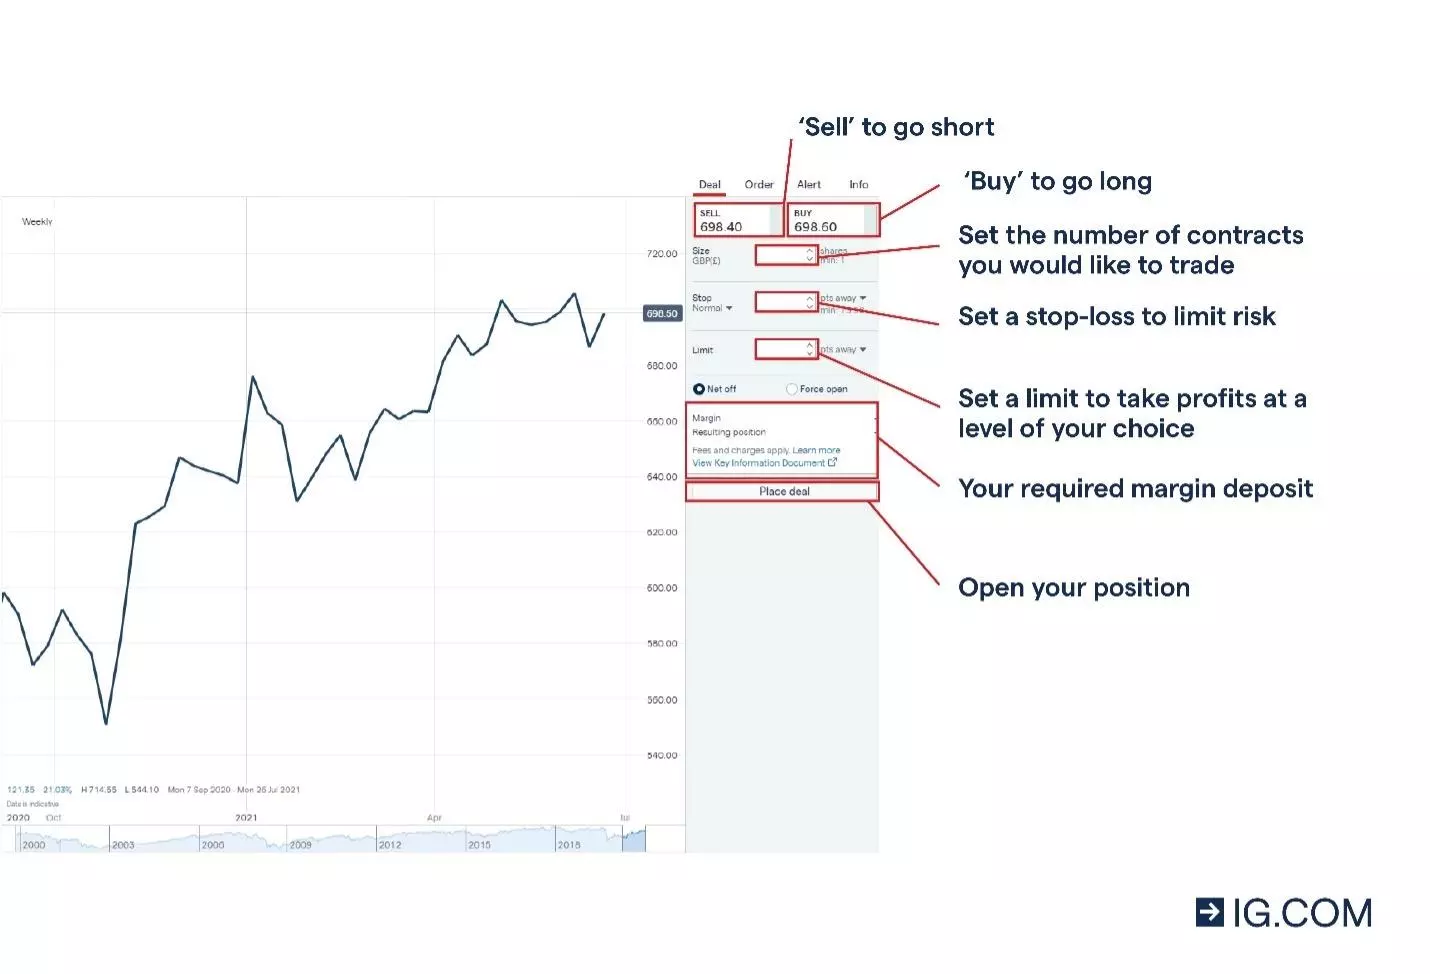 Sell to go short explained